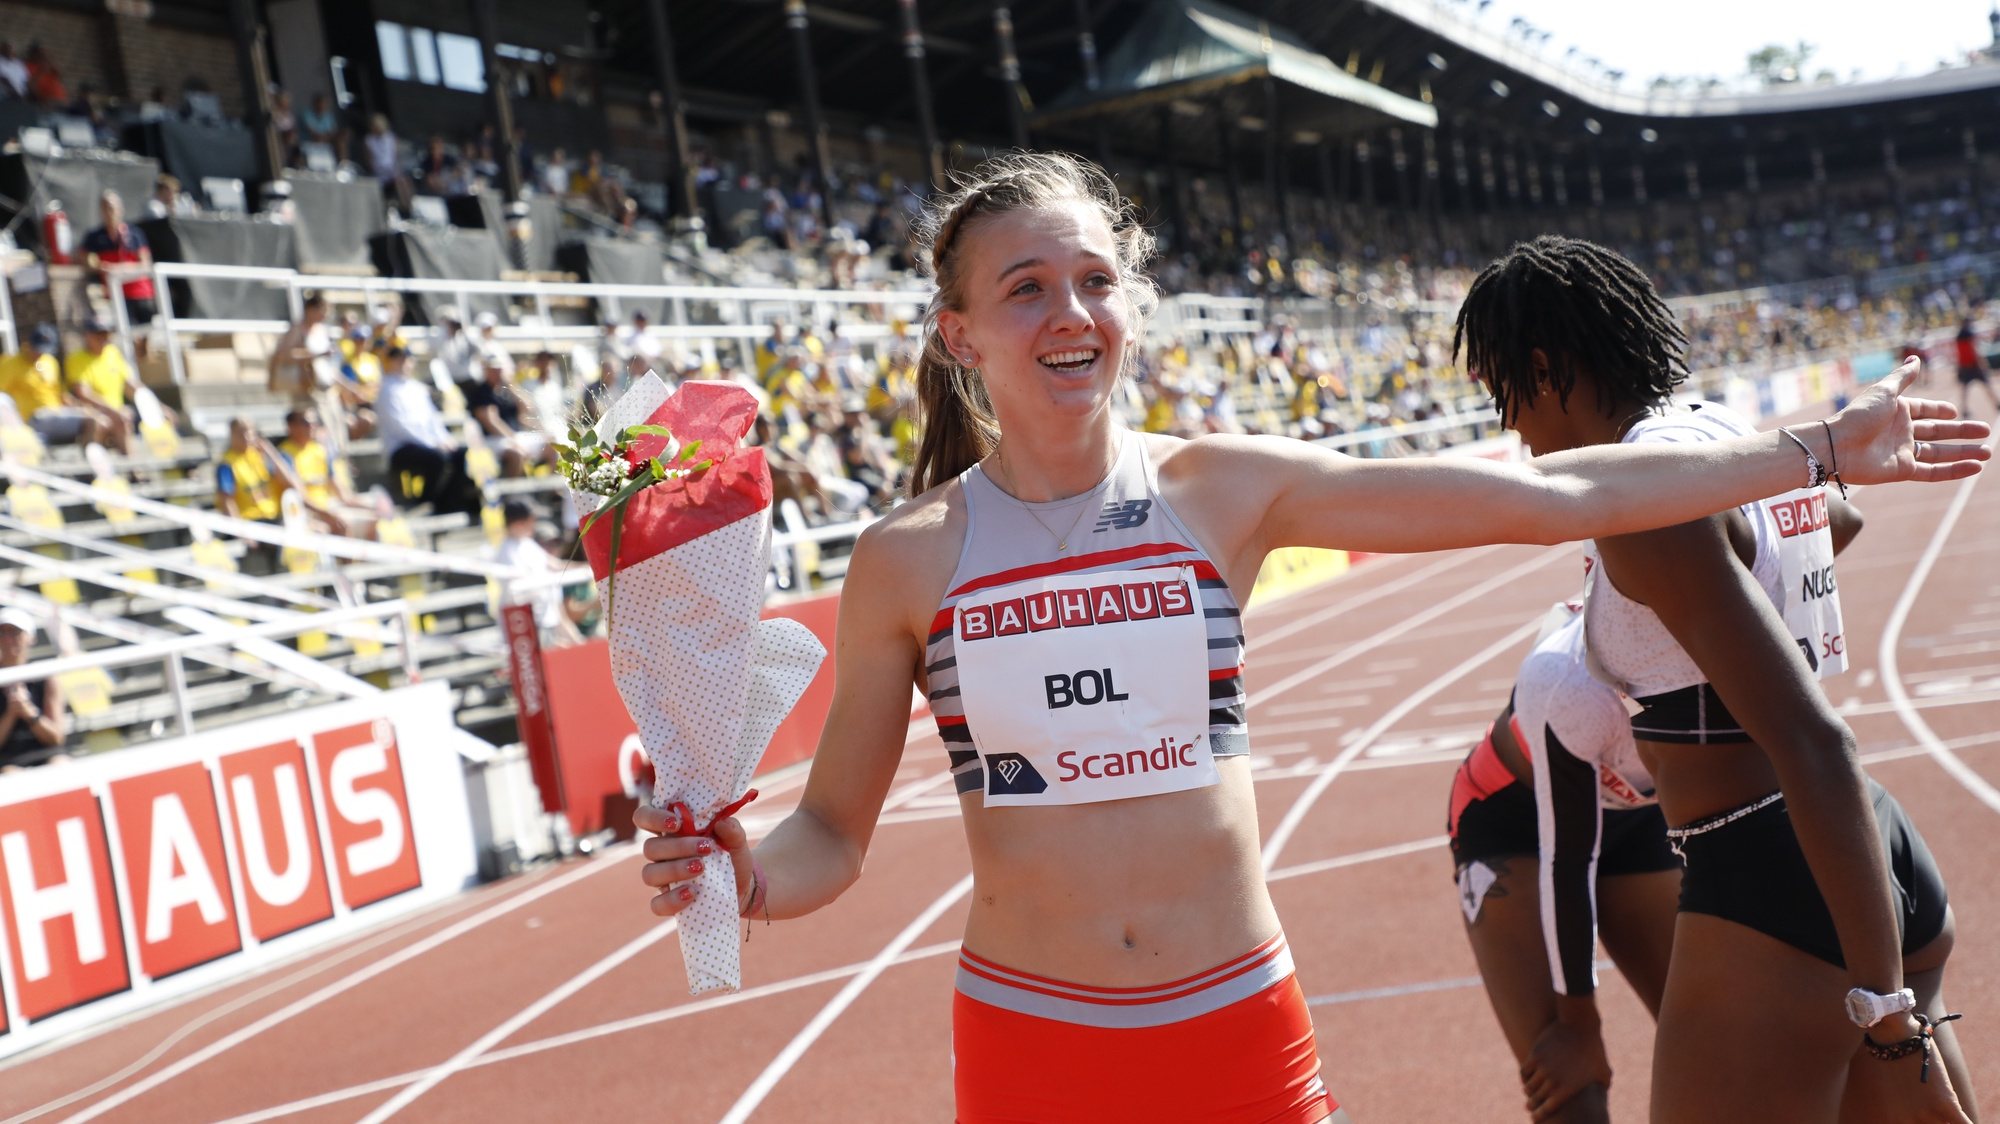 epa09322256 Femke Bol of the Netherlands wins the 400m hurdles and sets a new stadium record during the Wanda Diamond League Track and Field Championships in Stockholm, Sweden, 04 July 2021.  EPA/Christine Olsson/TT SWEDEN OUT